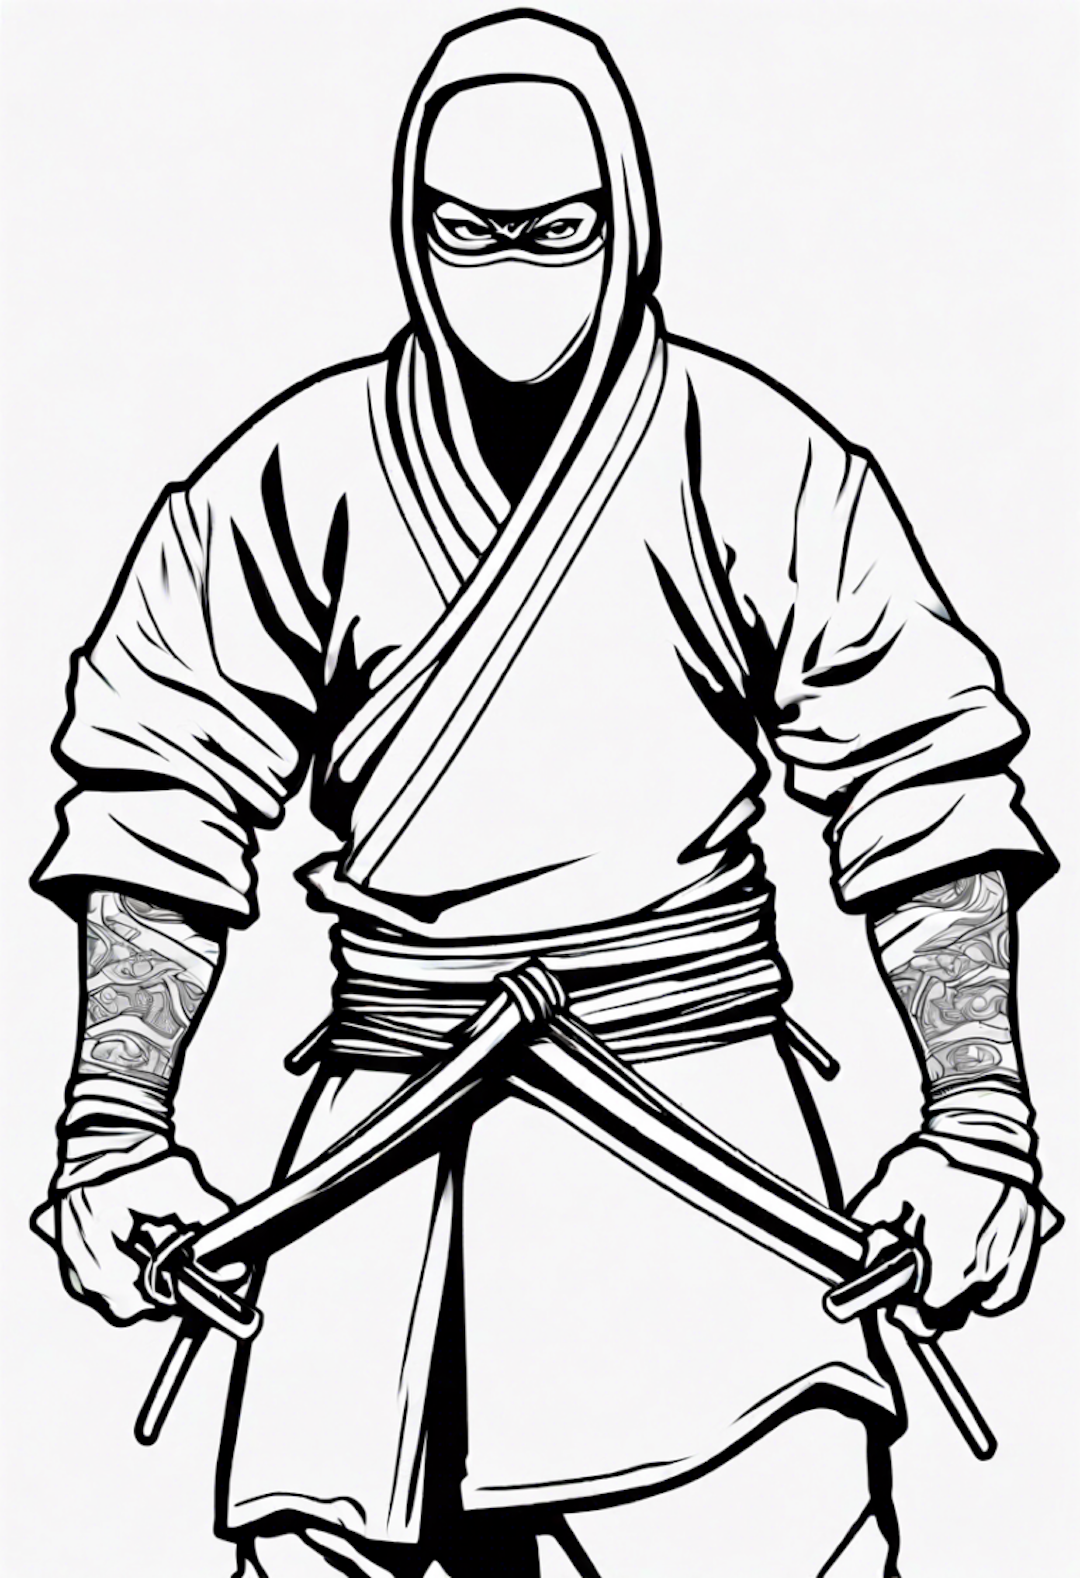 Ninja Warrior Coloring Page coloring pages